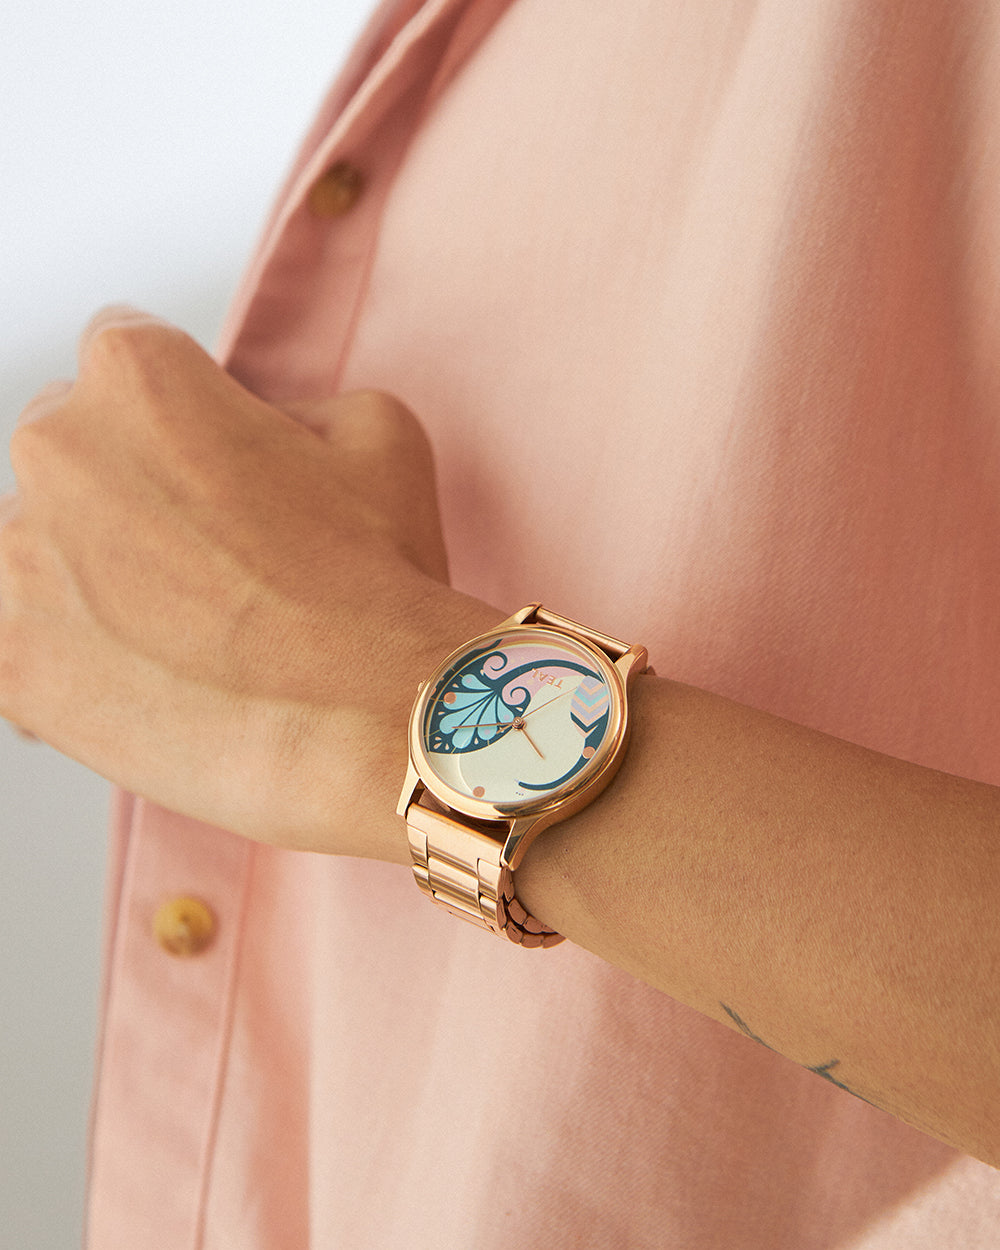 Teal By Chumbak | Urban feathers Watch - Metal Link Strap